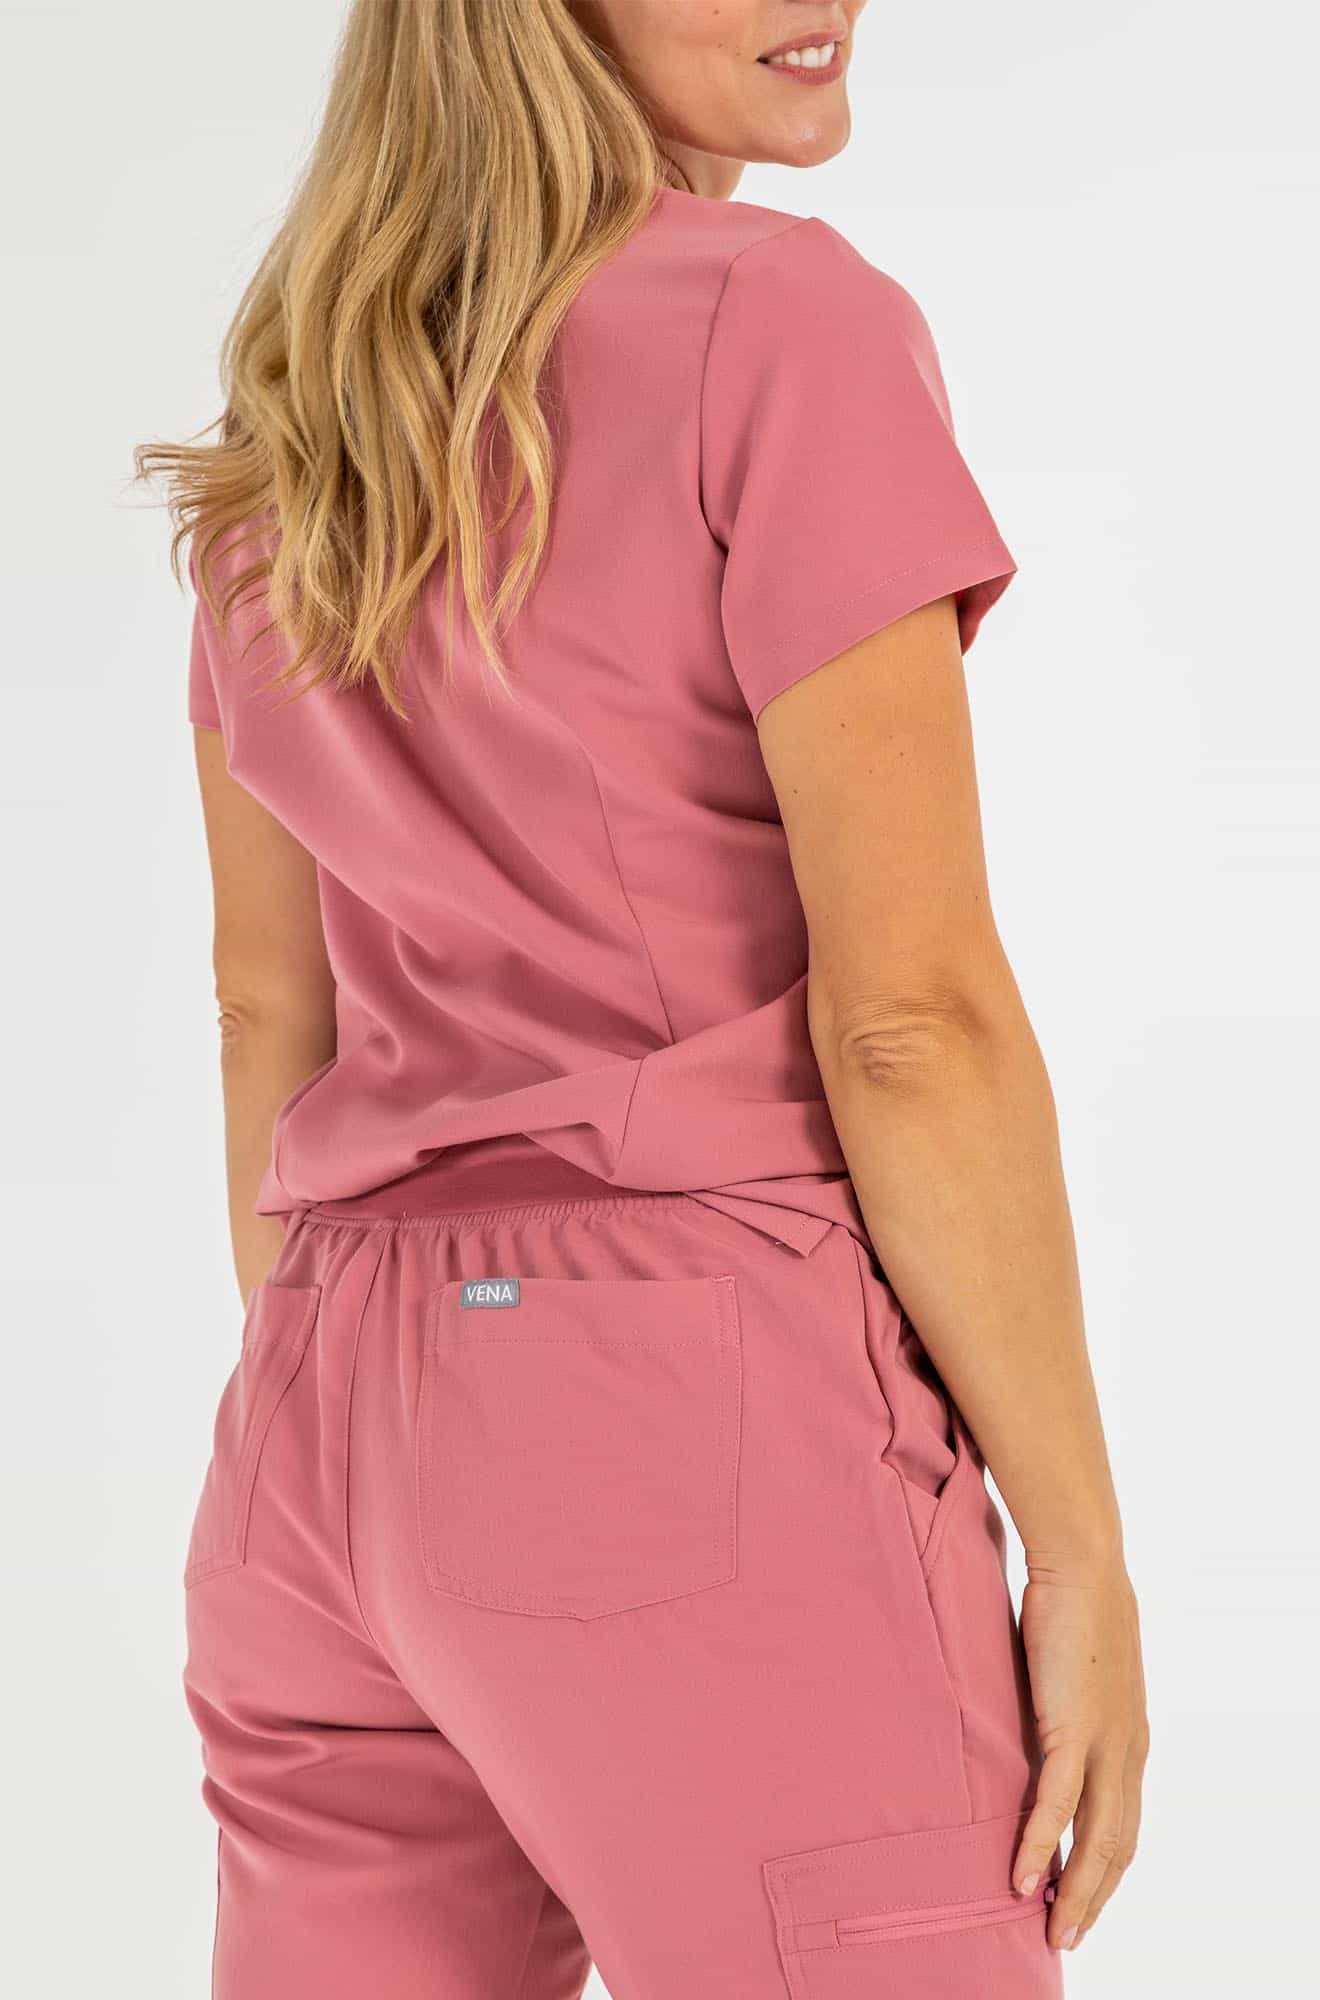 Vena ladies jogger style scrub pants lady featuring the back pocket of the scrub#style_women#colour_rose